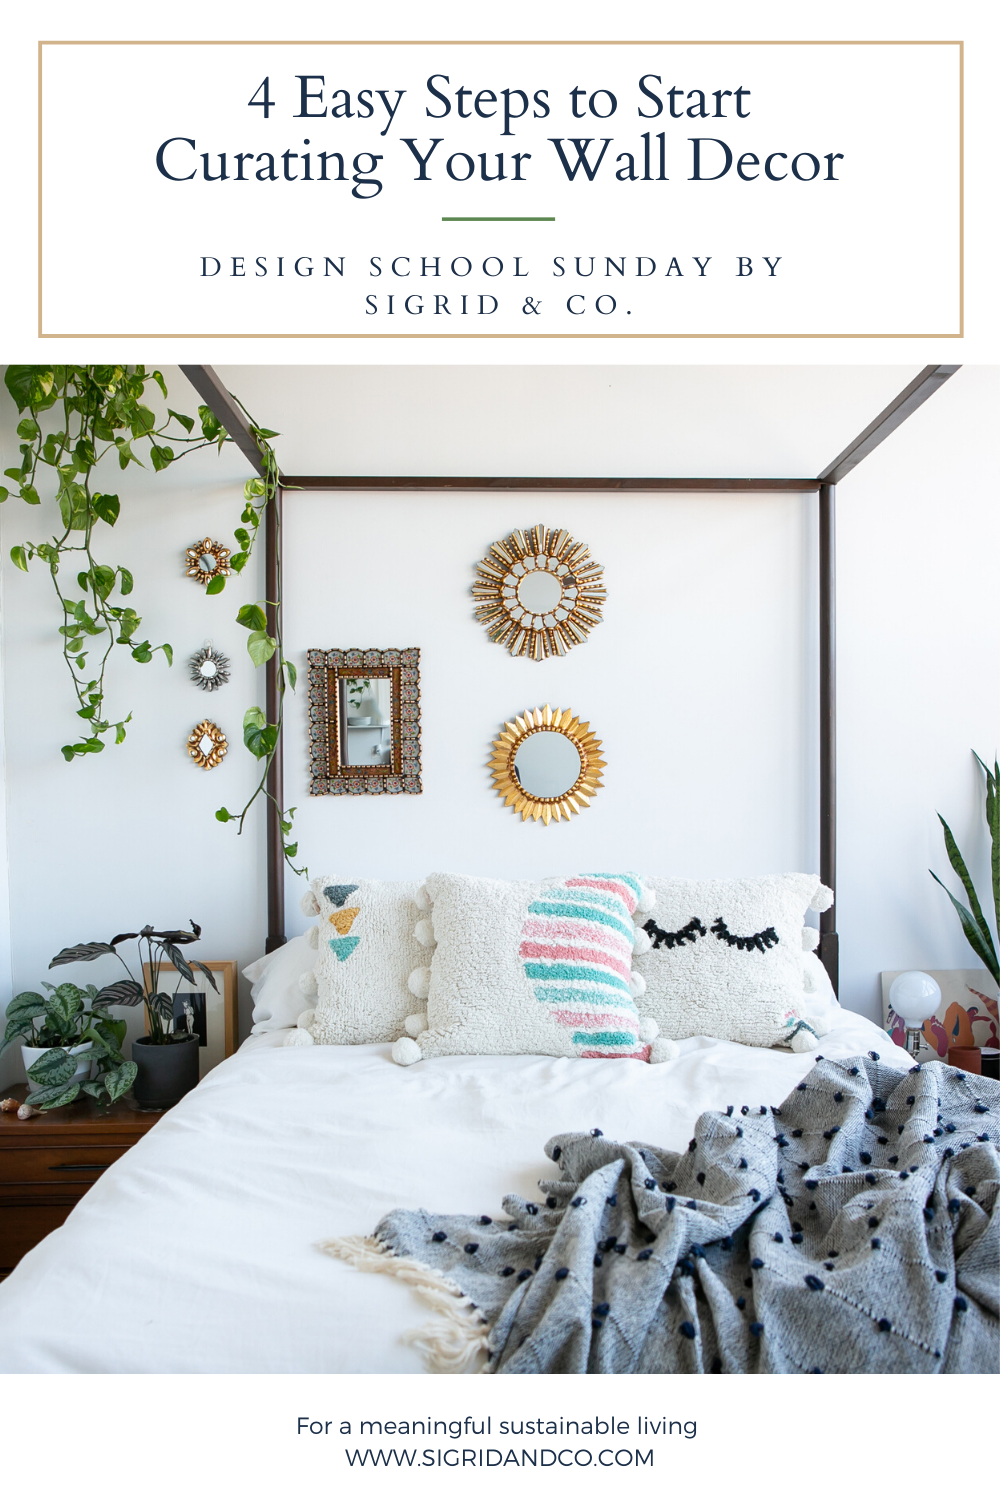 4 Steps to Start Curating Your Wall Decor - Sigrid & Co.